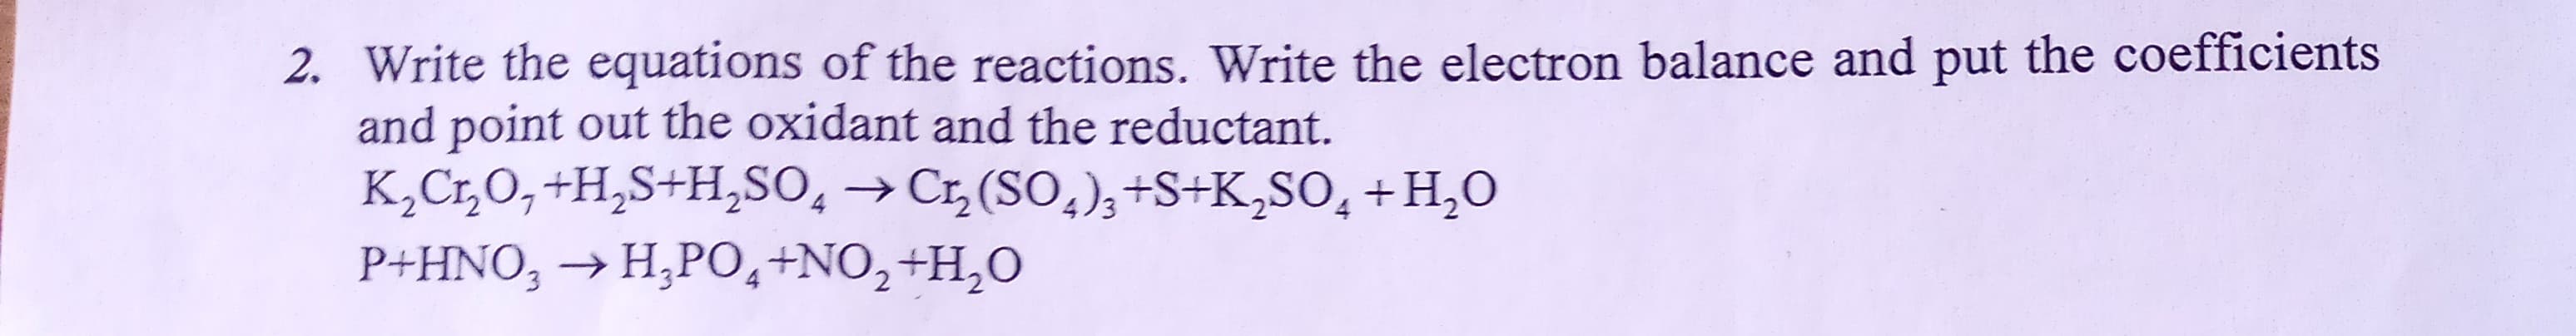 2. Write the equations of the reactions. Write the electron balance and put the coefficients
and point out the oxidant and the reductant.
K,Cr,0,+H,S+H,SO, →Cr,(SO,),+S+K,SO, + H,O
P+HNO, → H,PO,+NO,+H,O
3.
